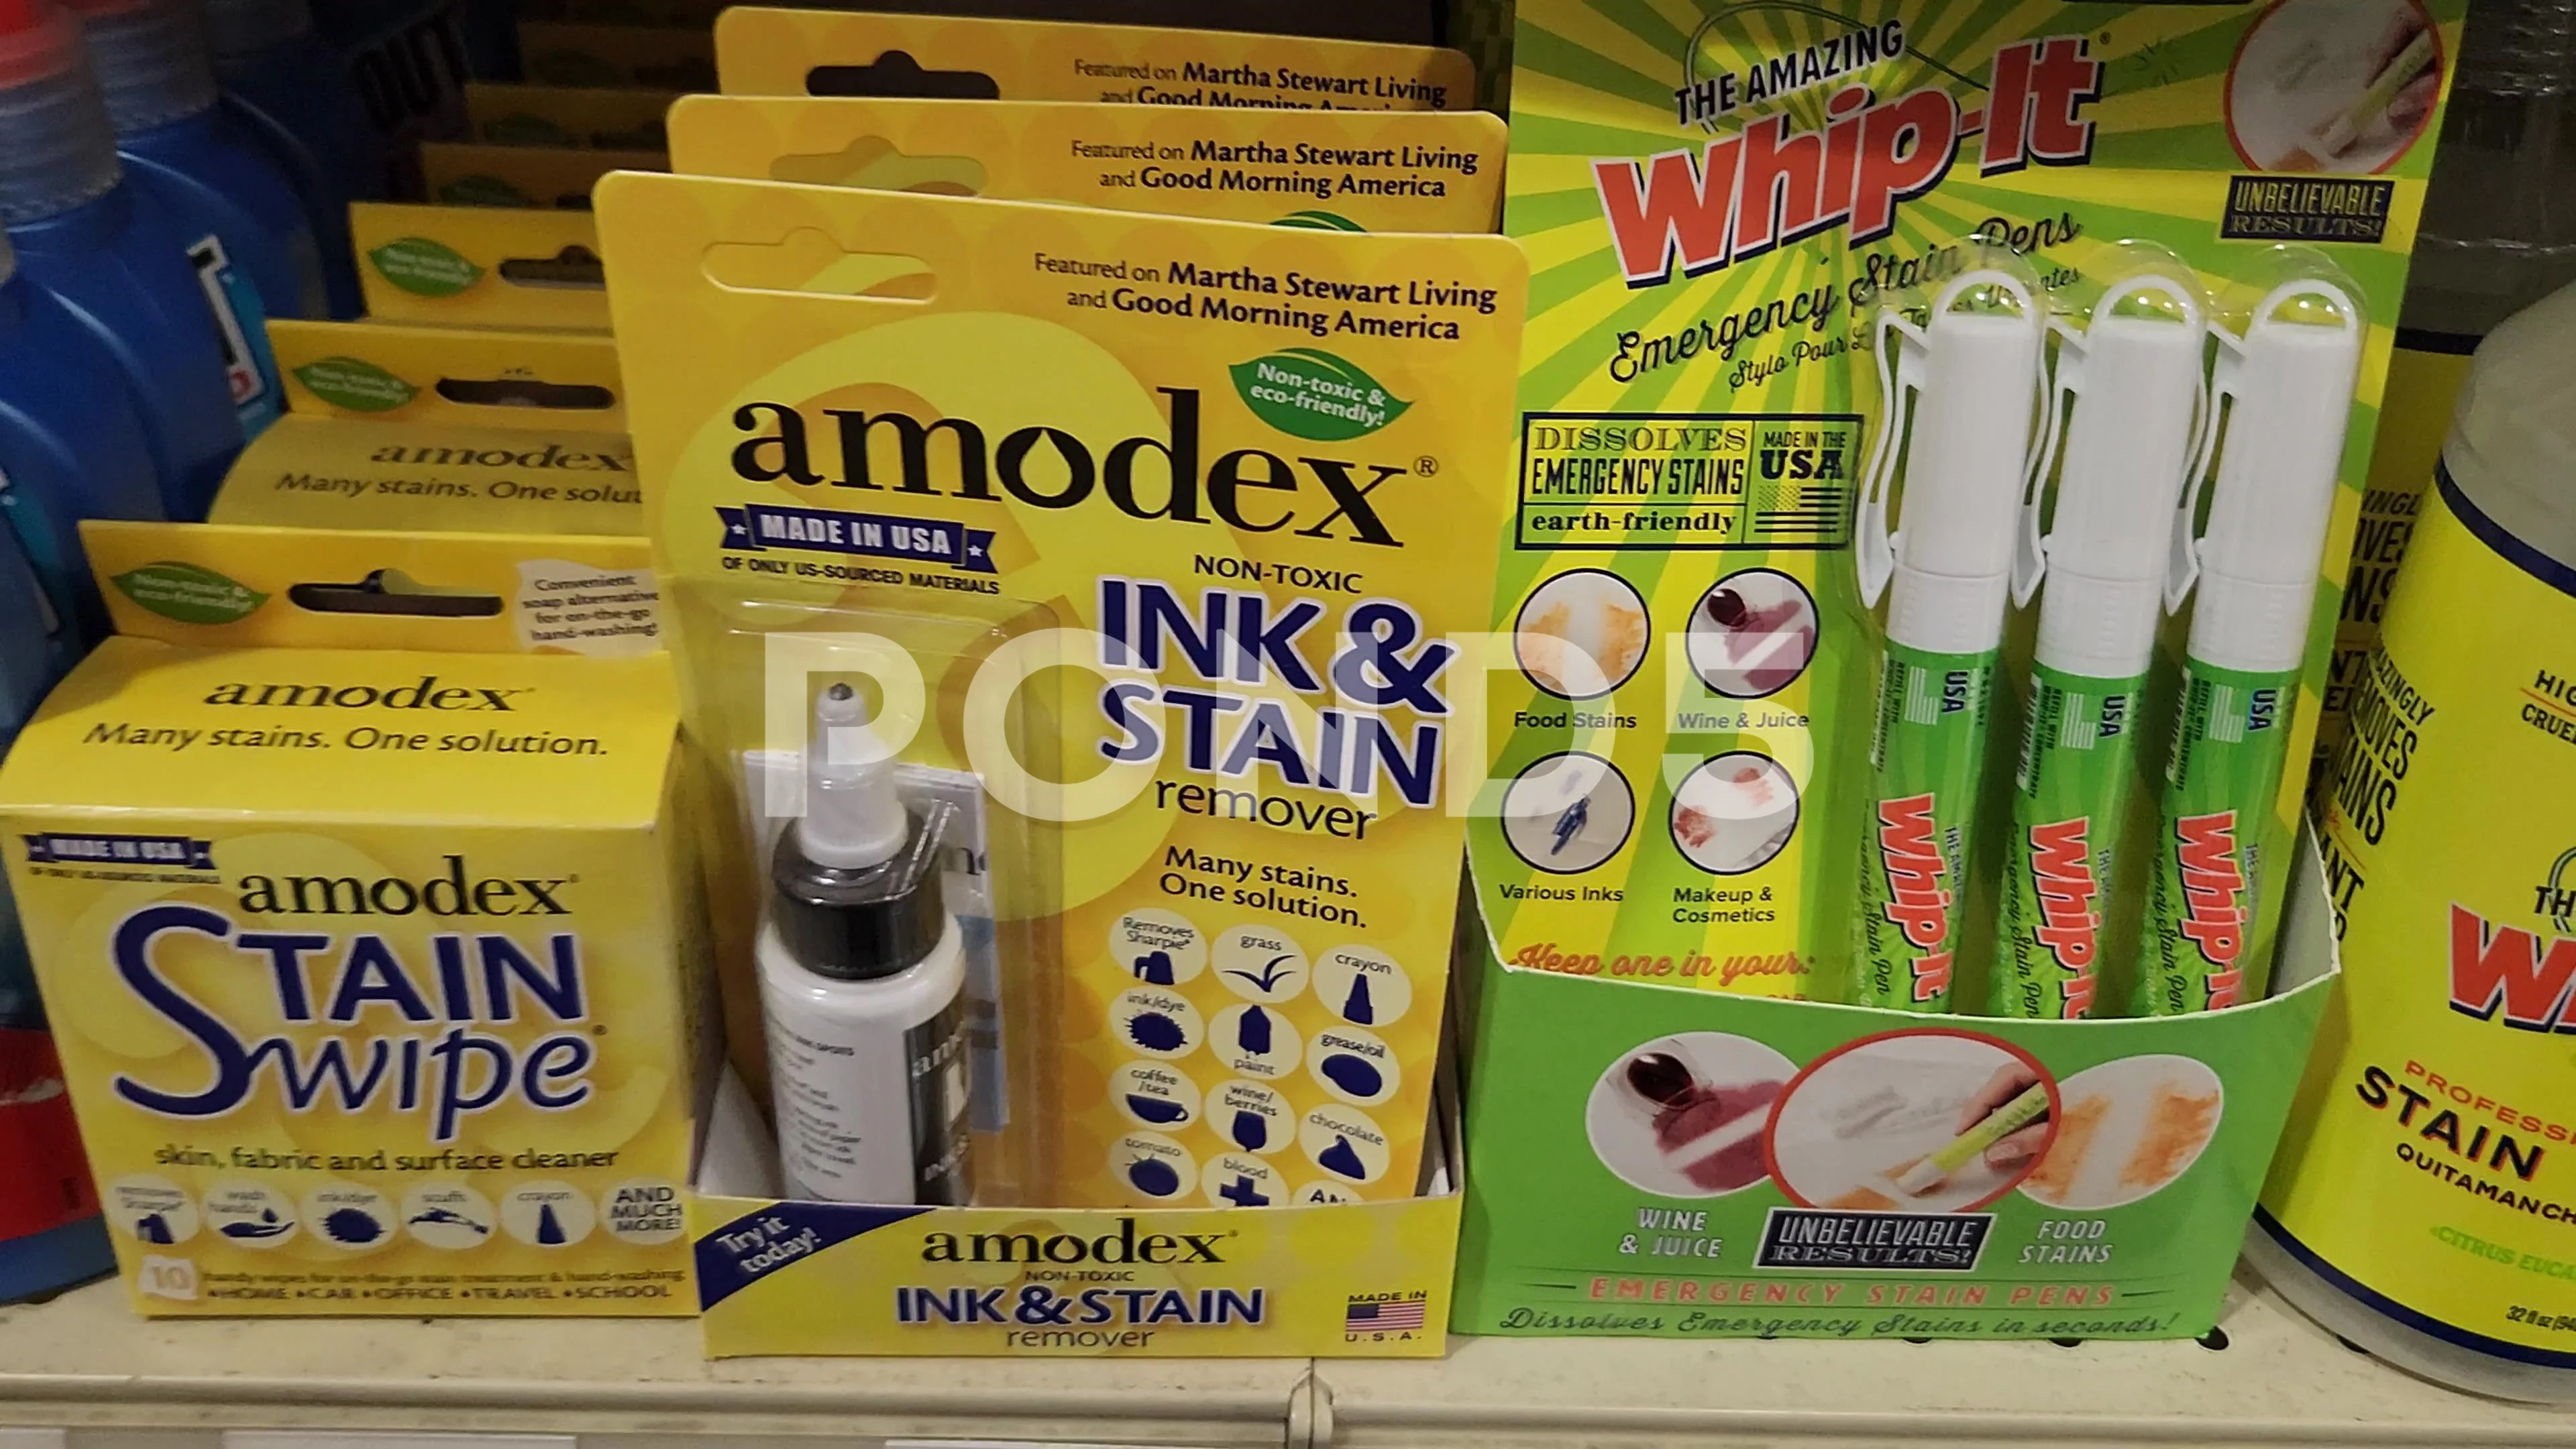 Amodex Ink and Stain Remover